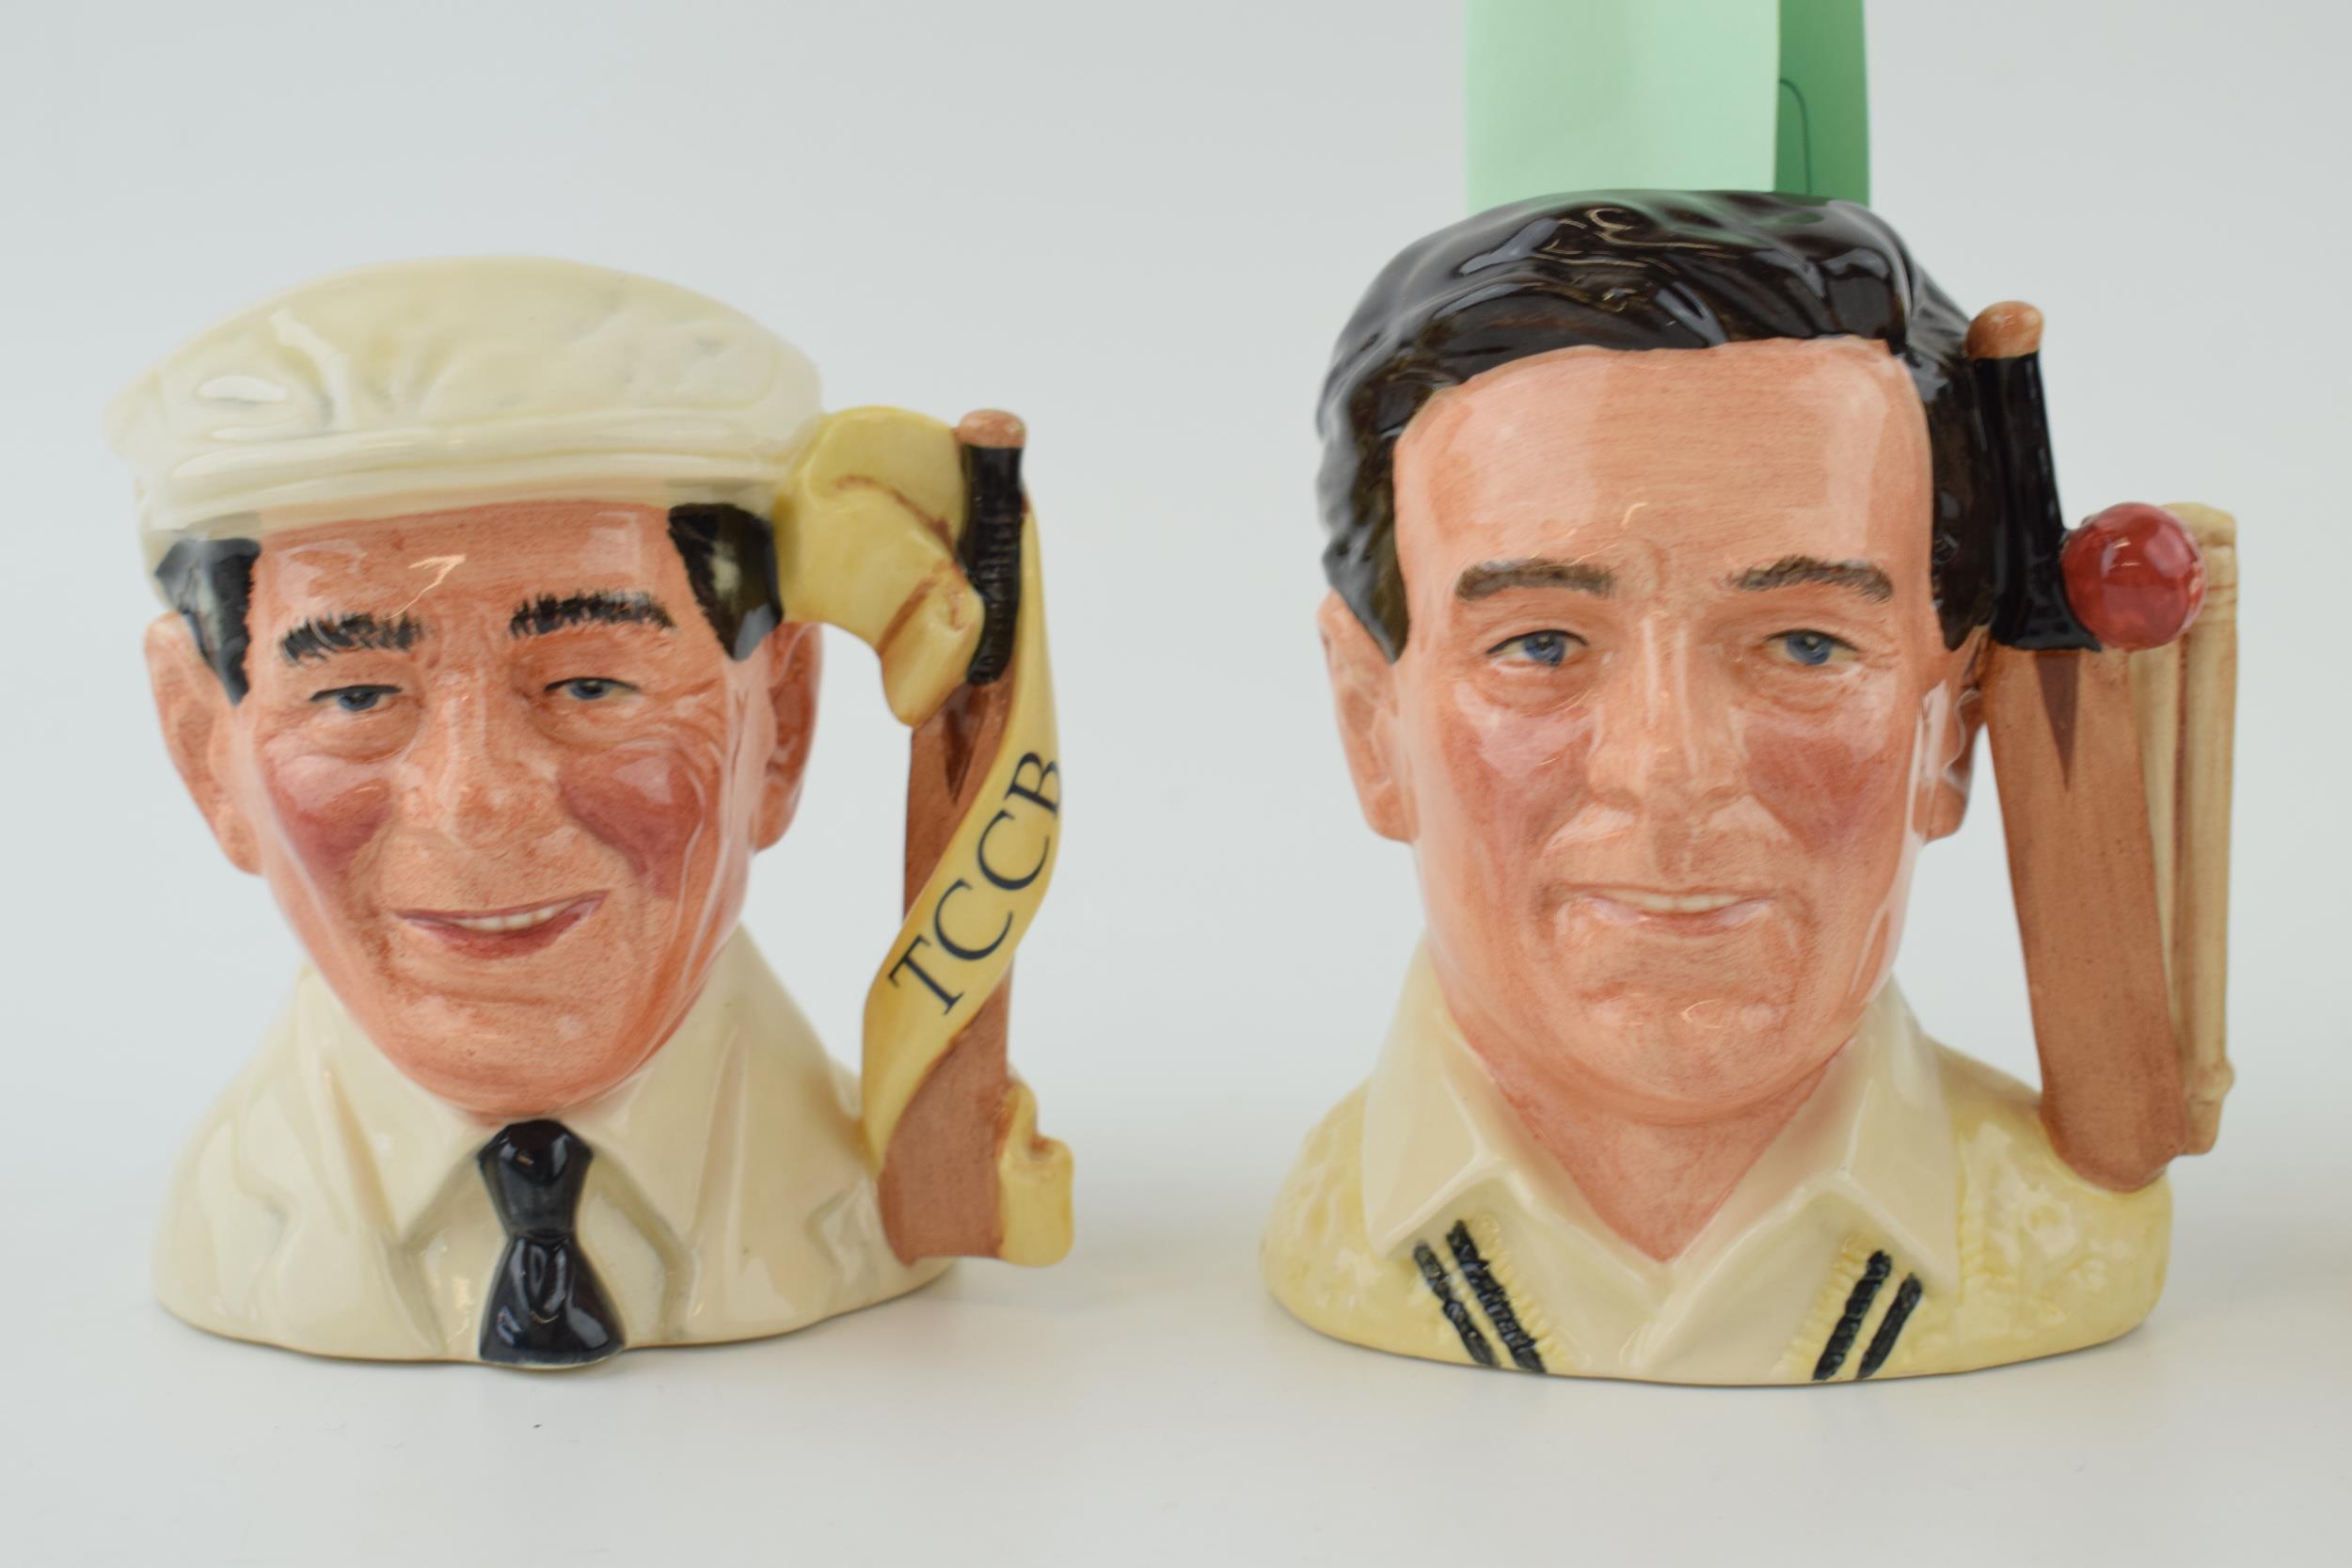 Small Royal Doulton character jugs of cricketers to include Denis Compton, the Hampshire Cricketer - Image 2 of 3